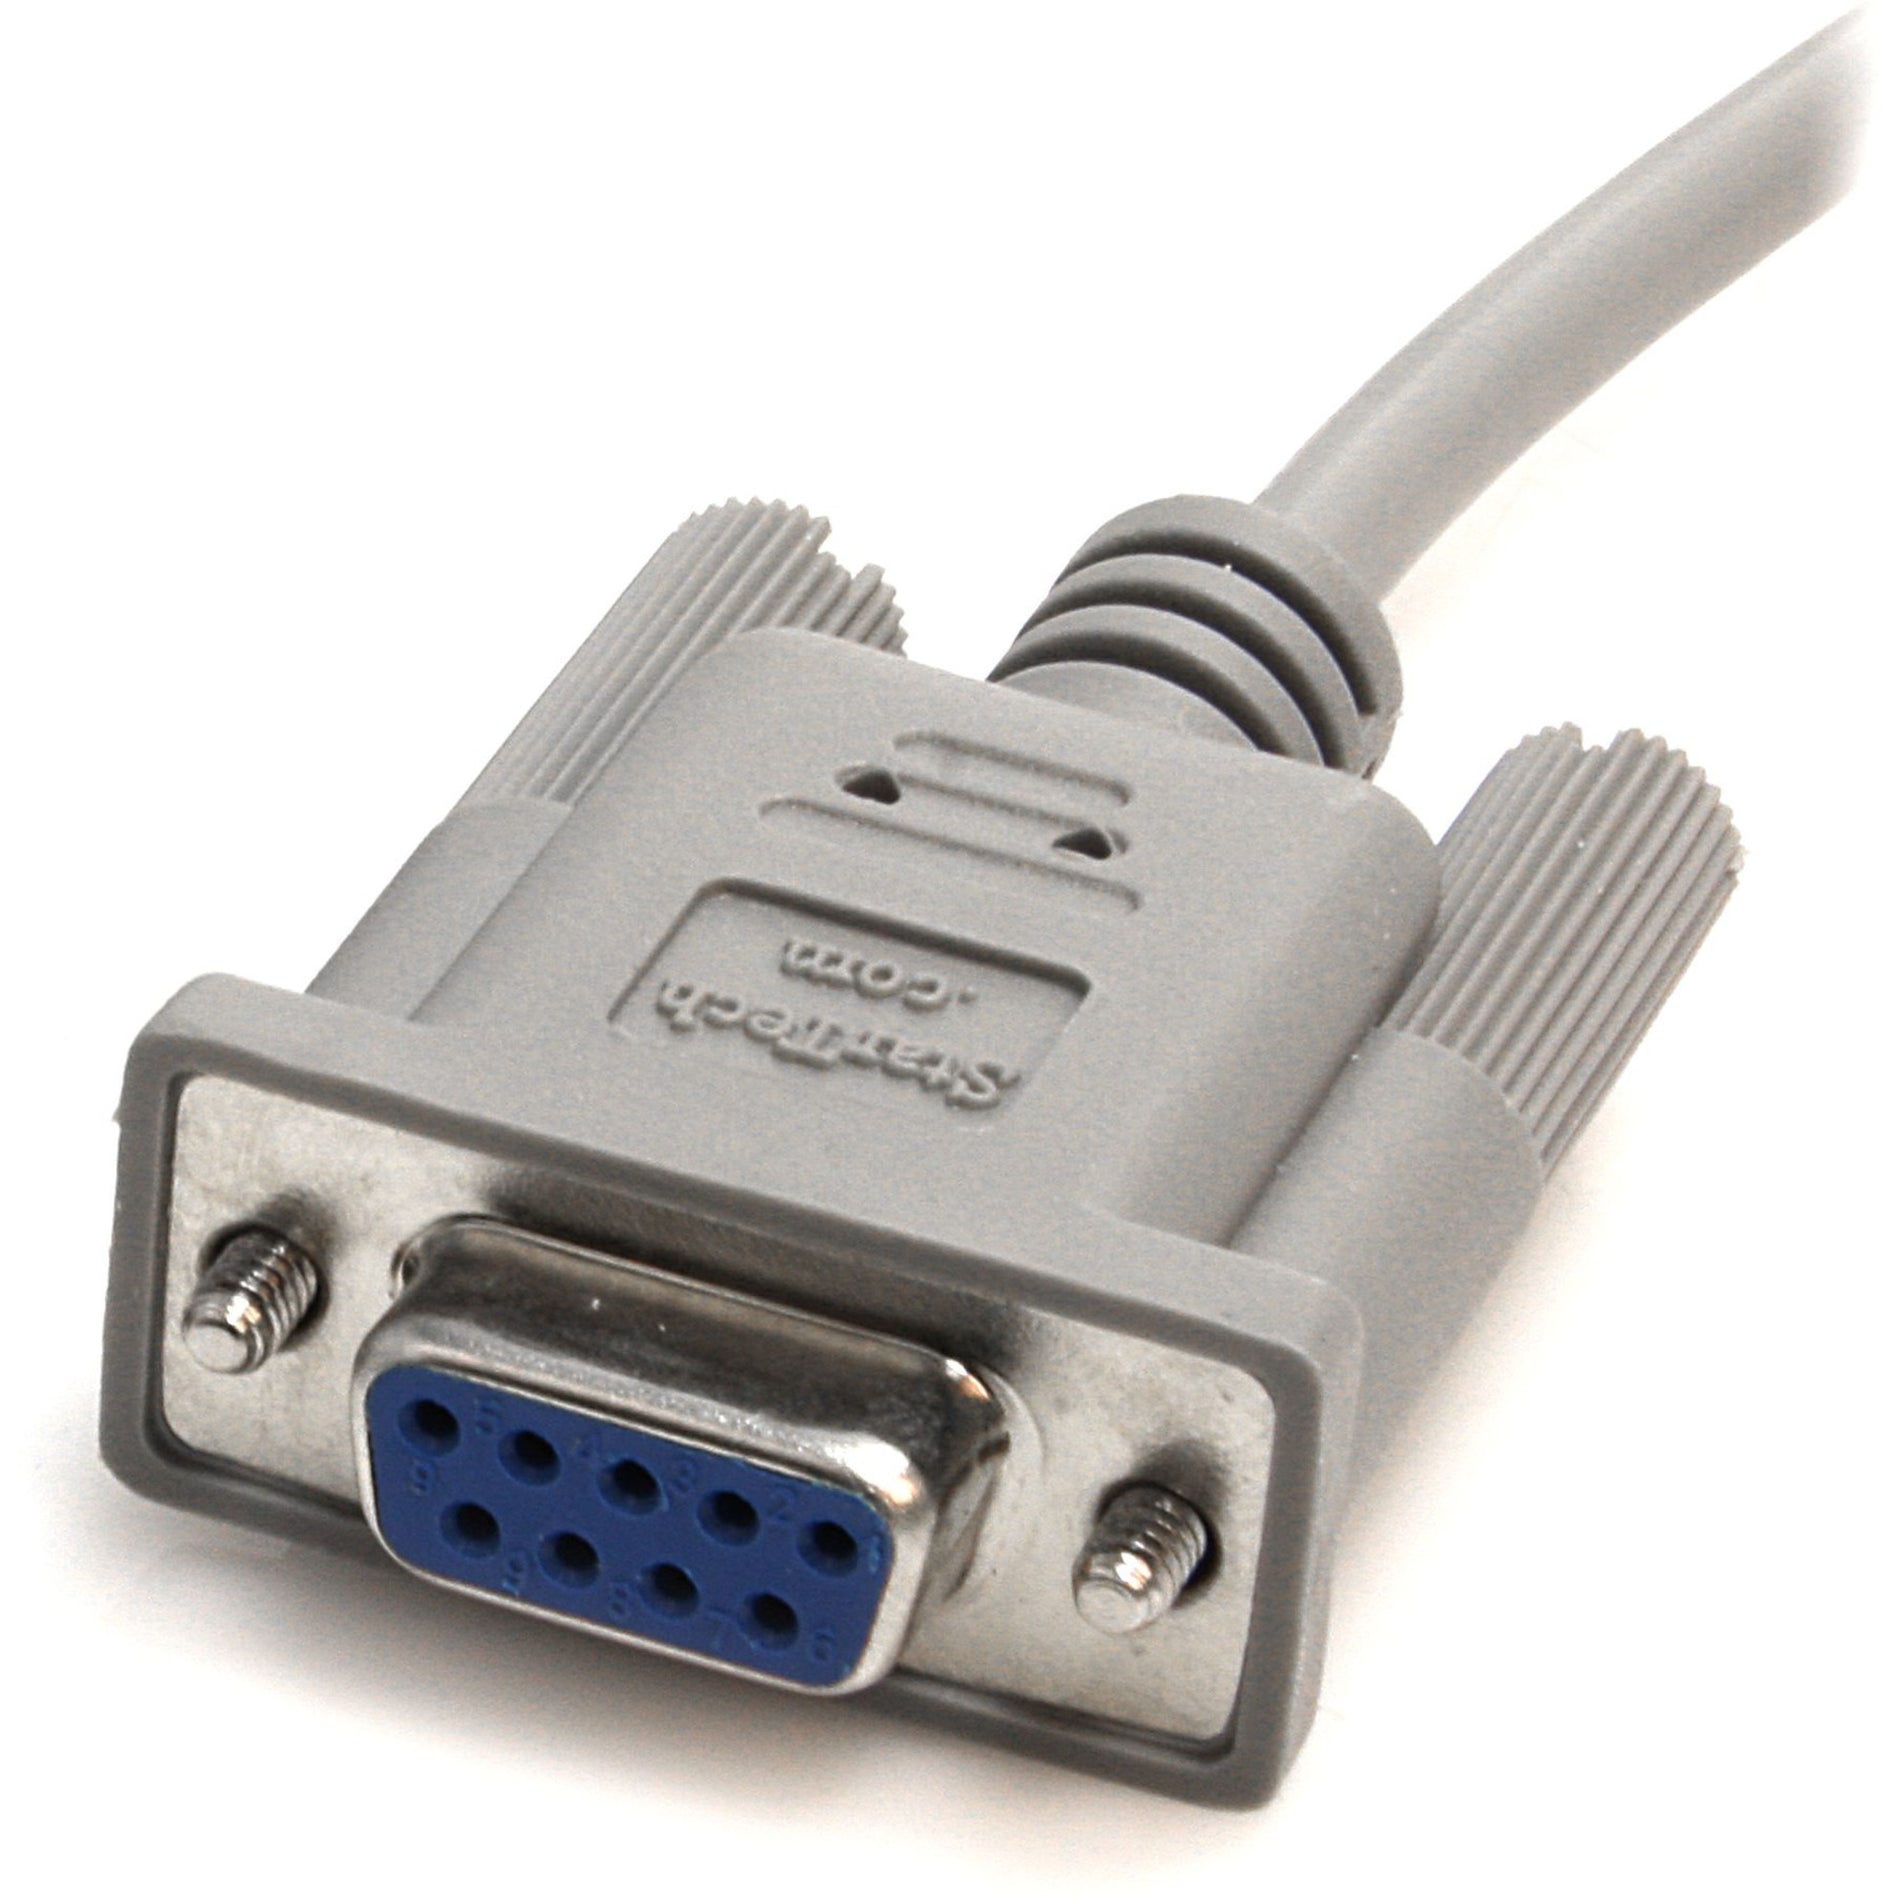 StarTech.com SCNM9FF Serial Null Modem Cable, 10 ft, Copper Conductor, Nickel Plated Connectors, PC Printer Modem Compatible